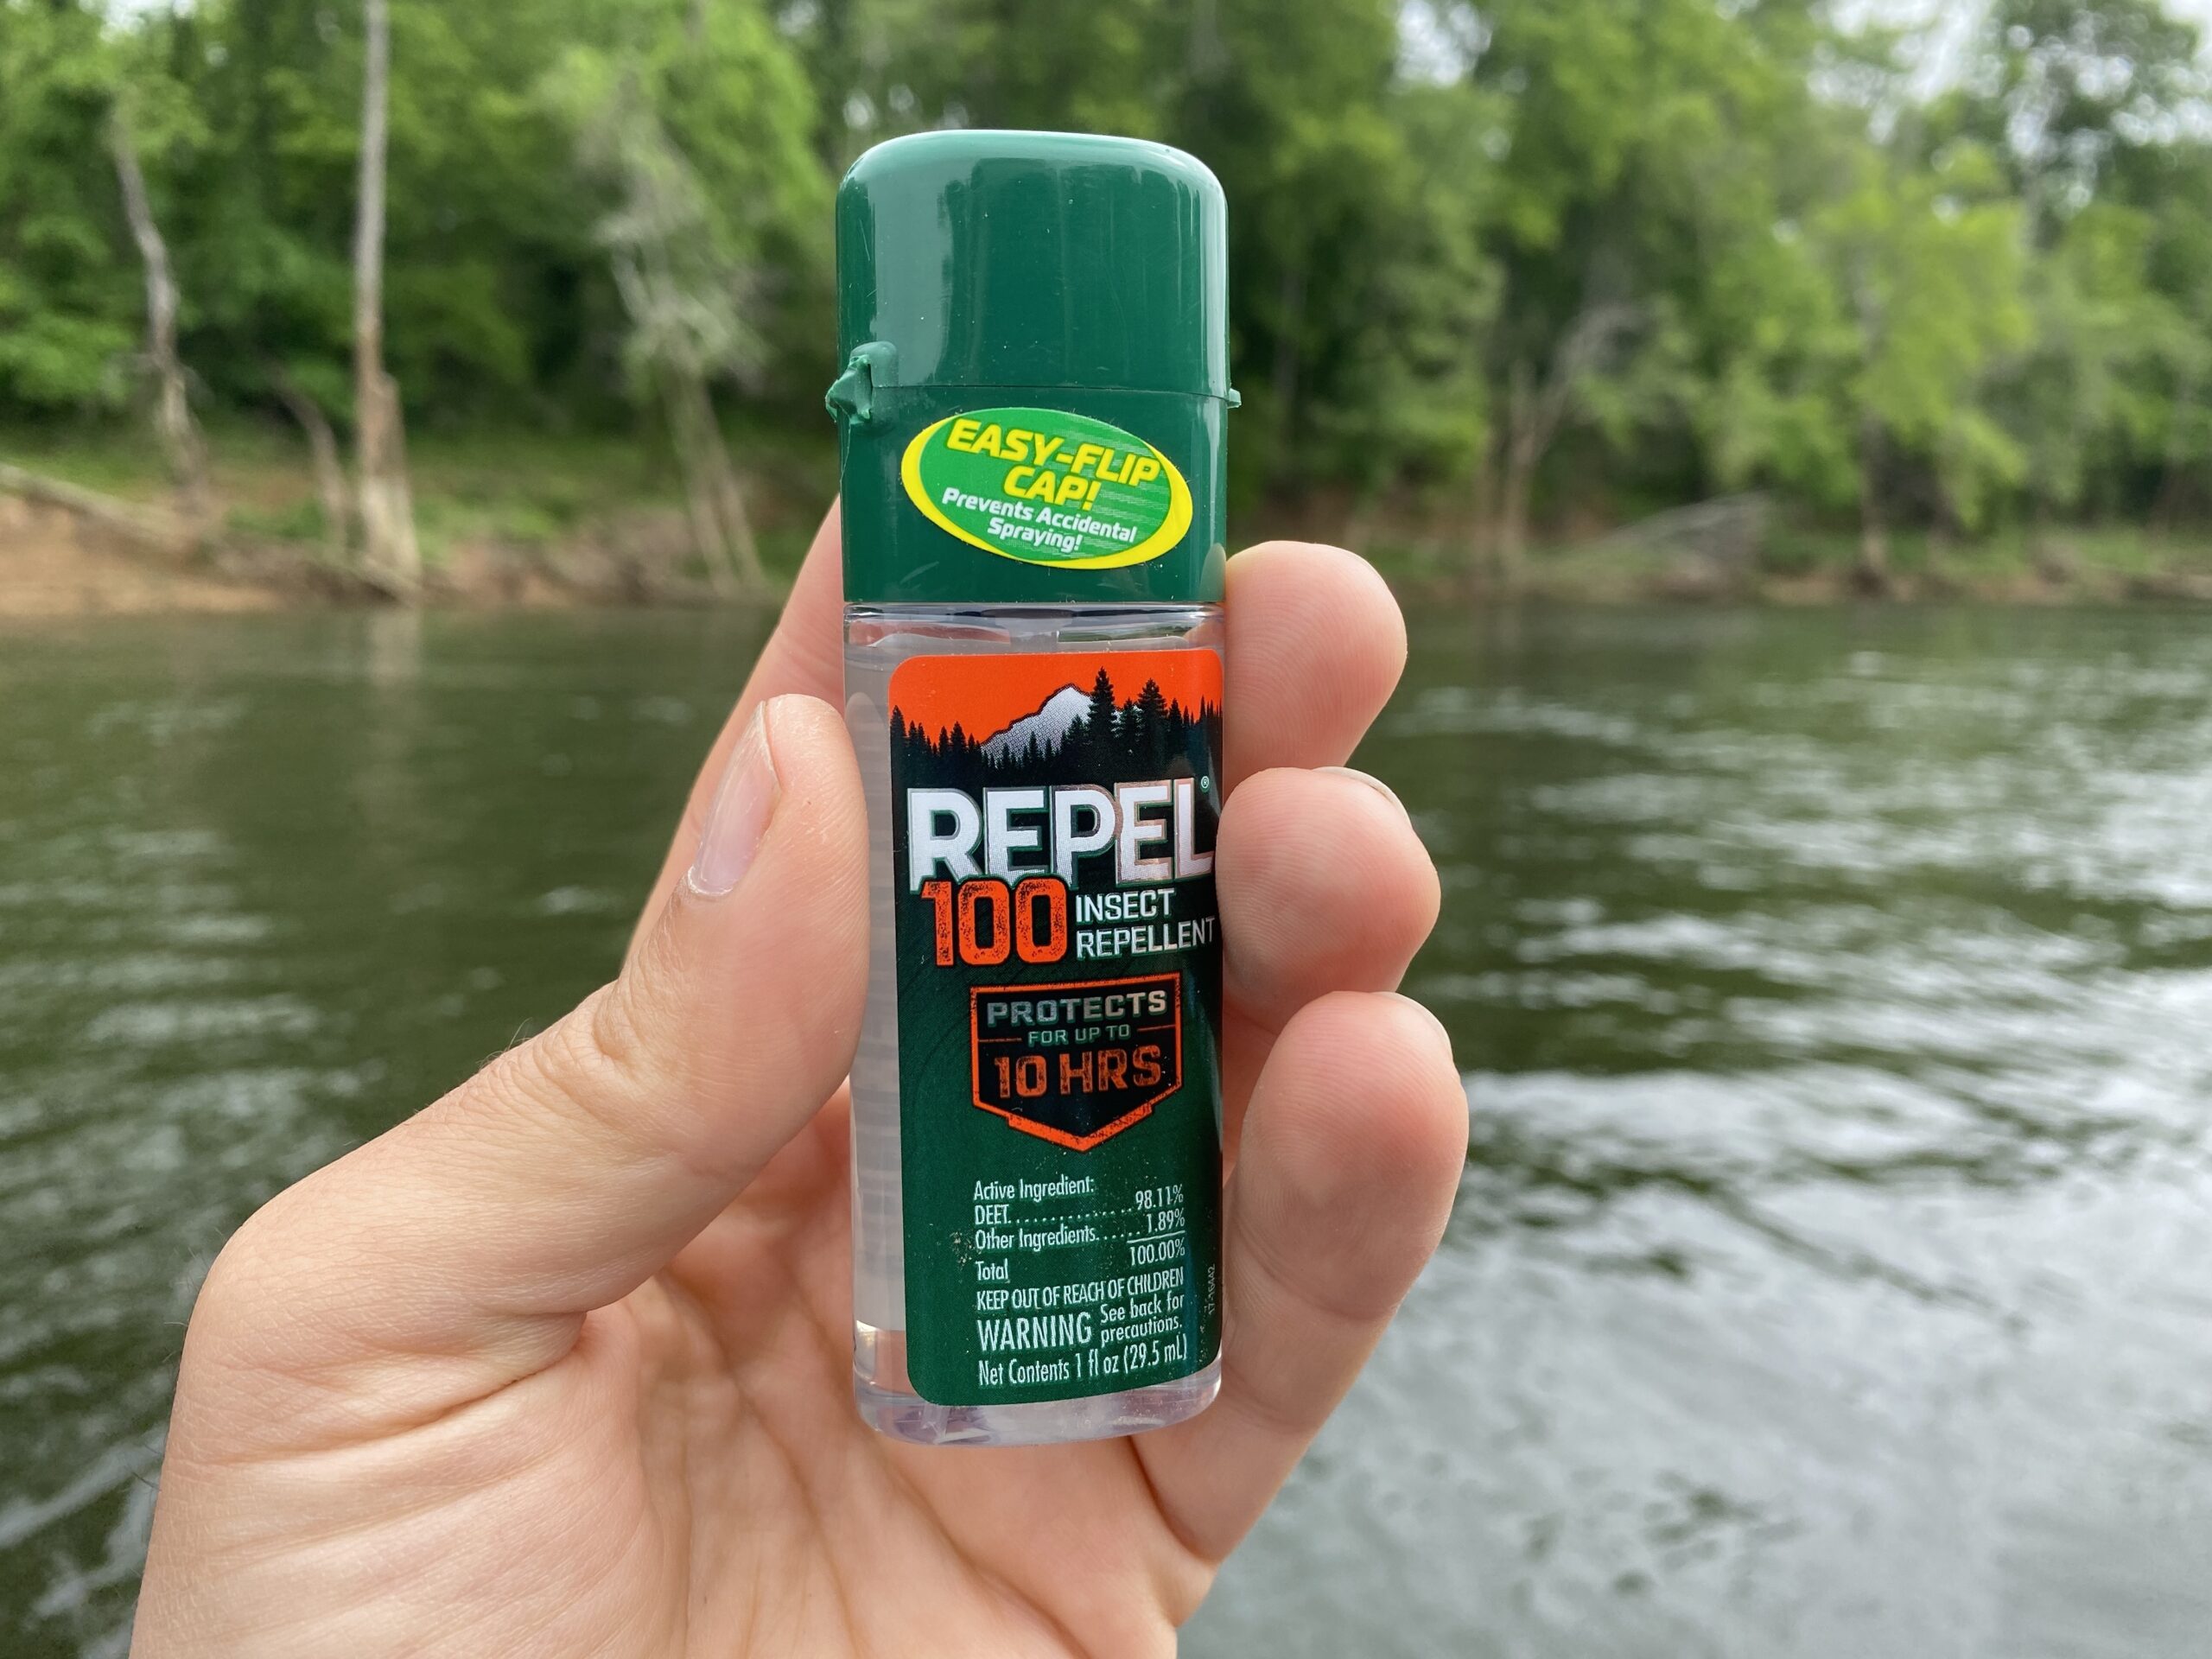 Repel 100 comes in a convenient sized bottle